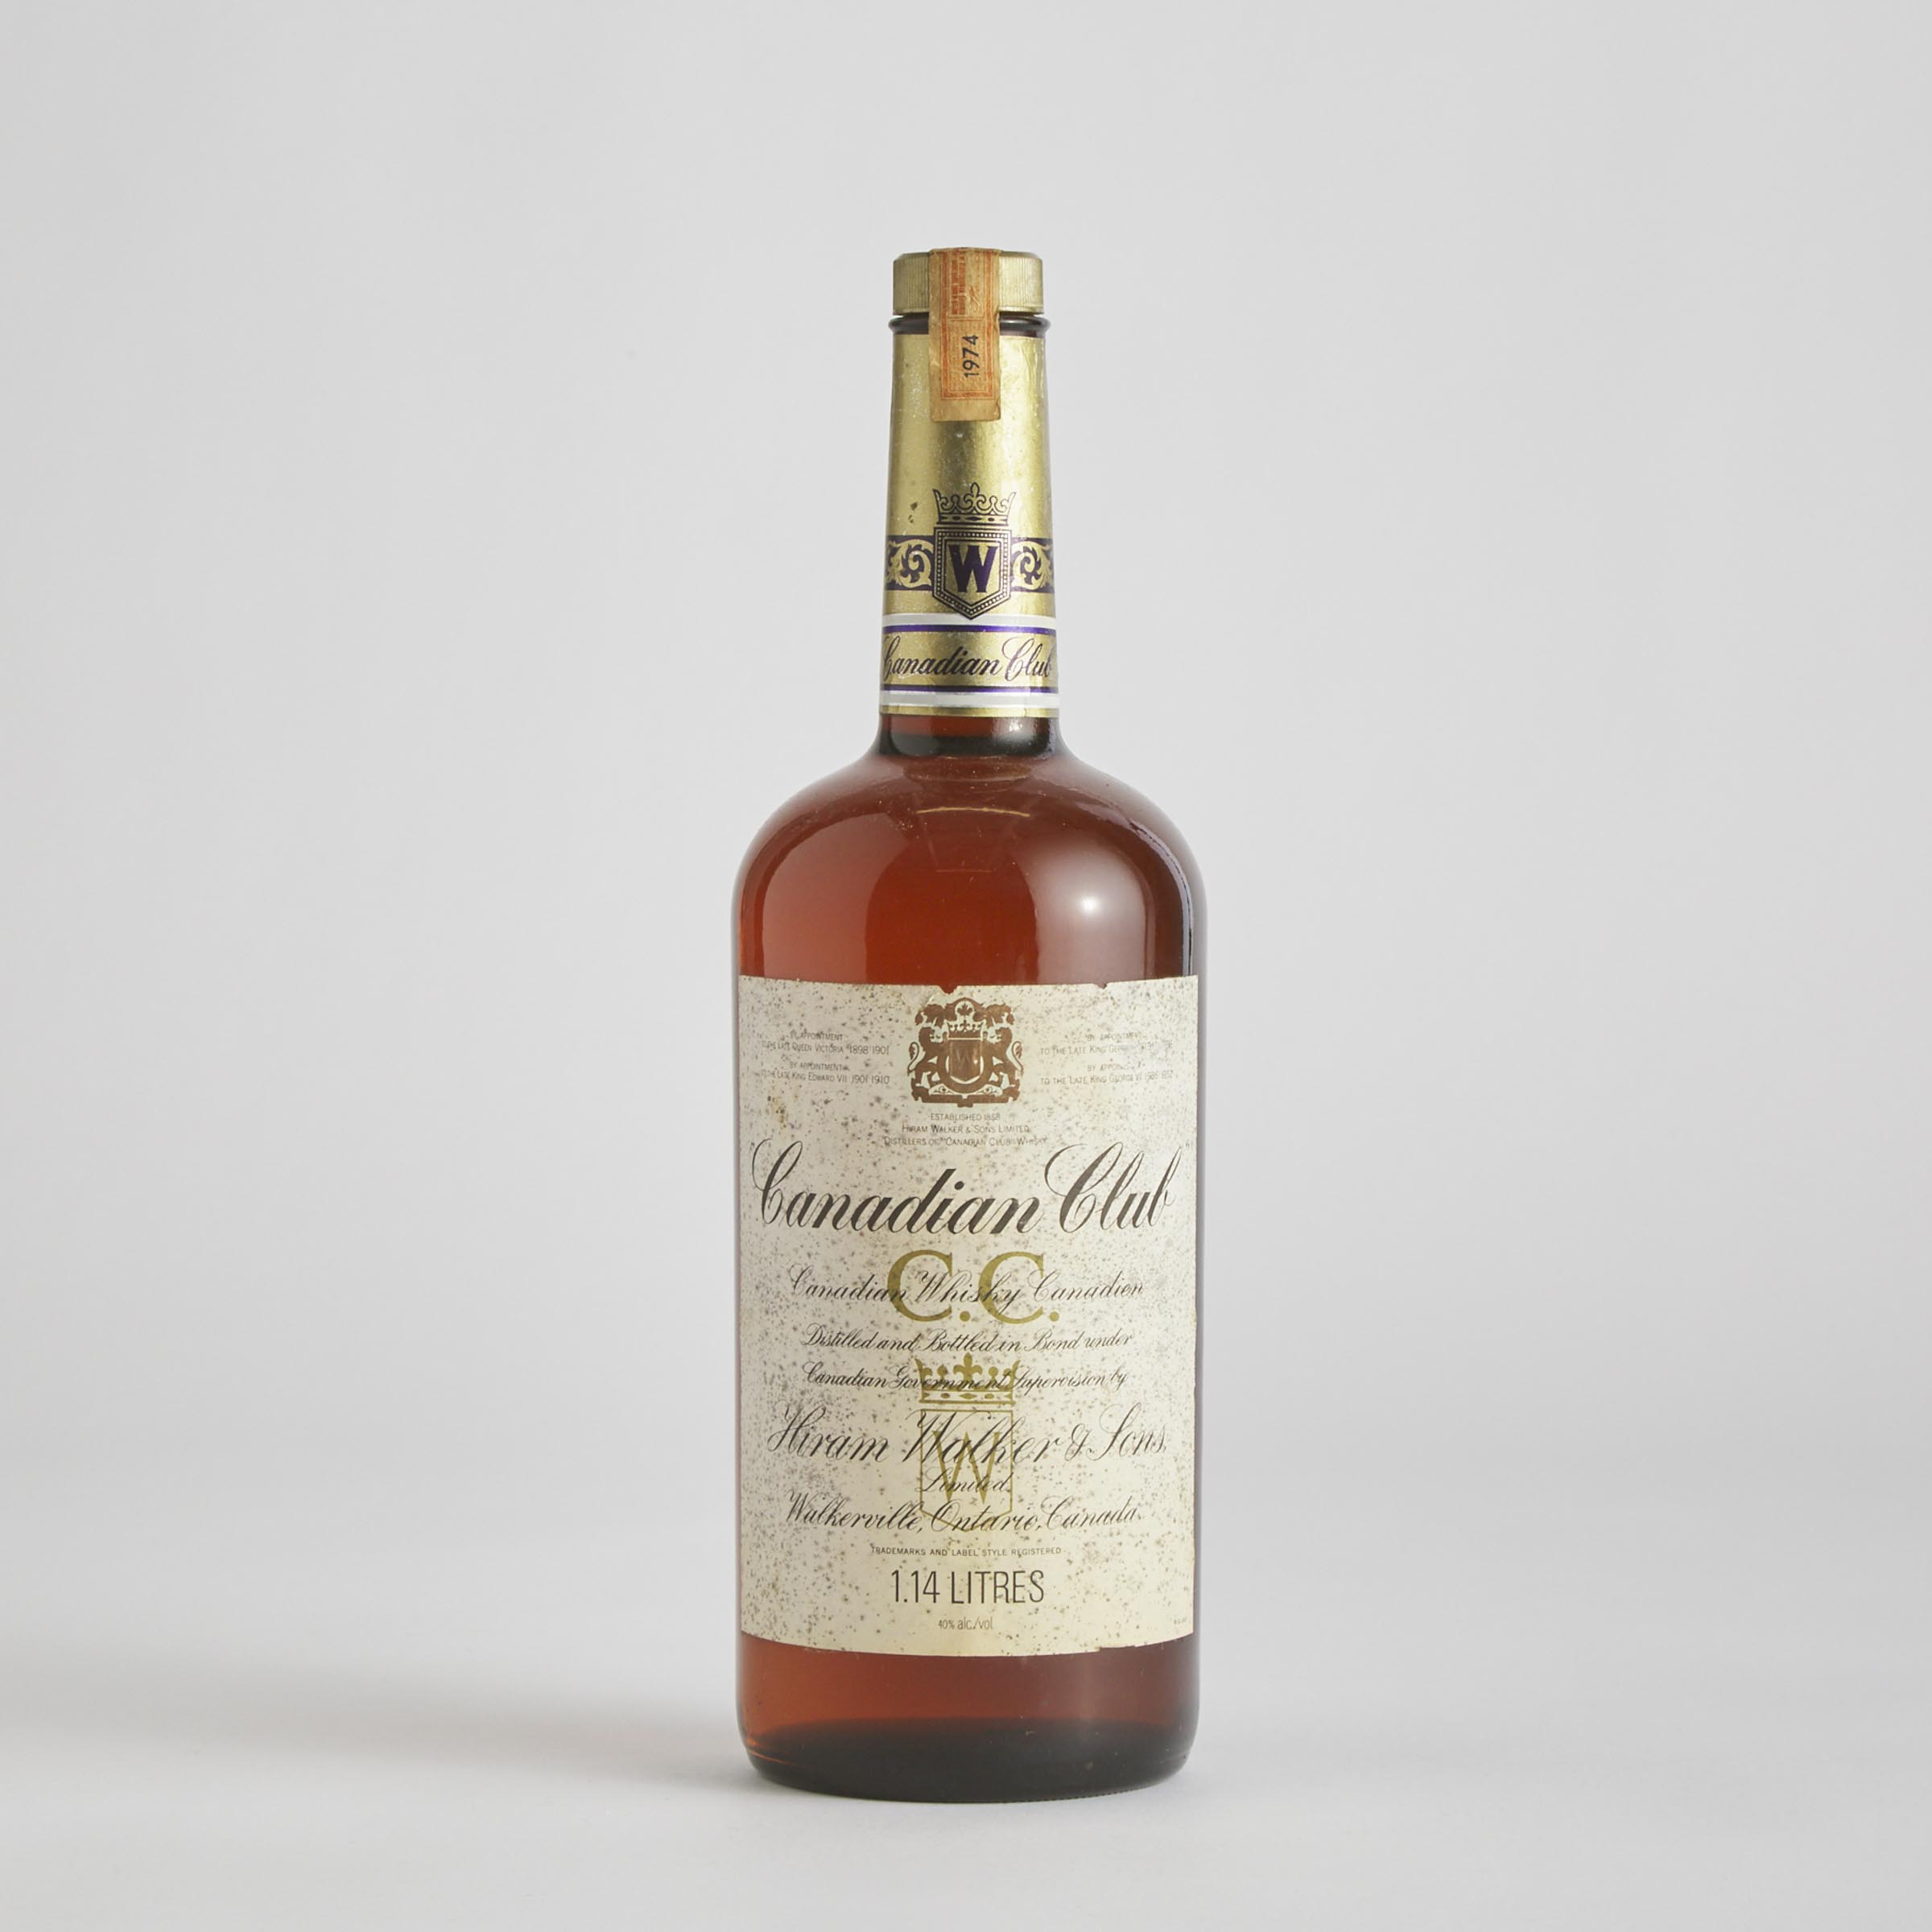 CANADIAN CLUB CANADIAN WHISKY (ONE 1.14 LITRES)